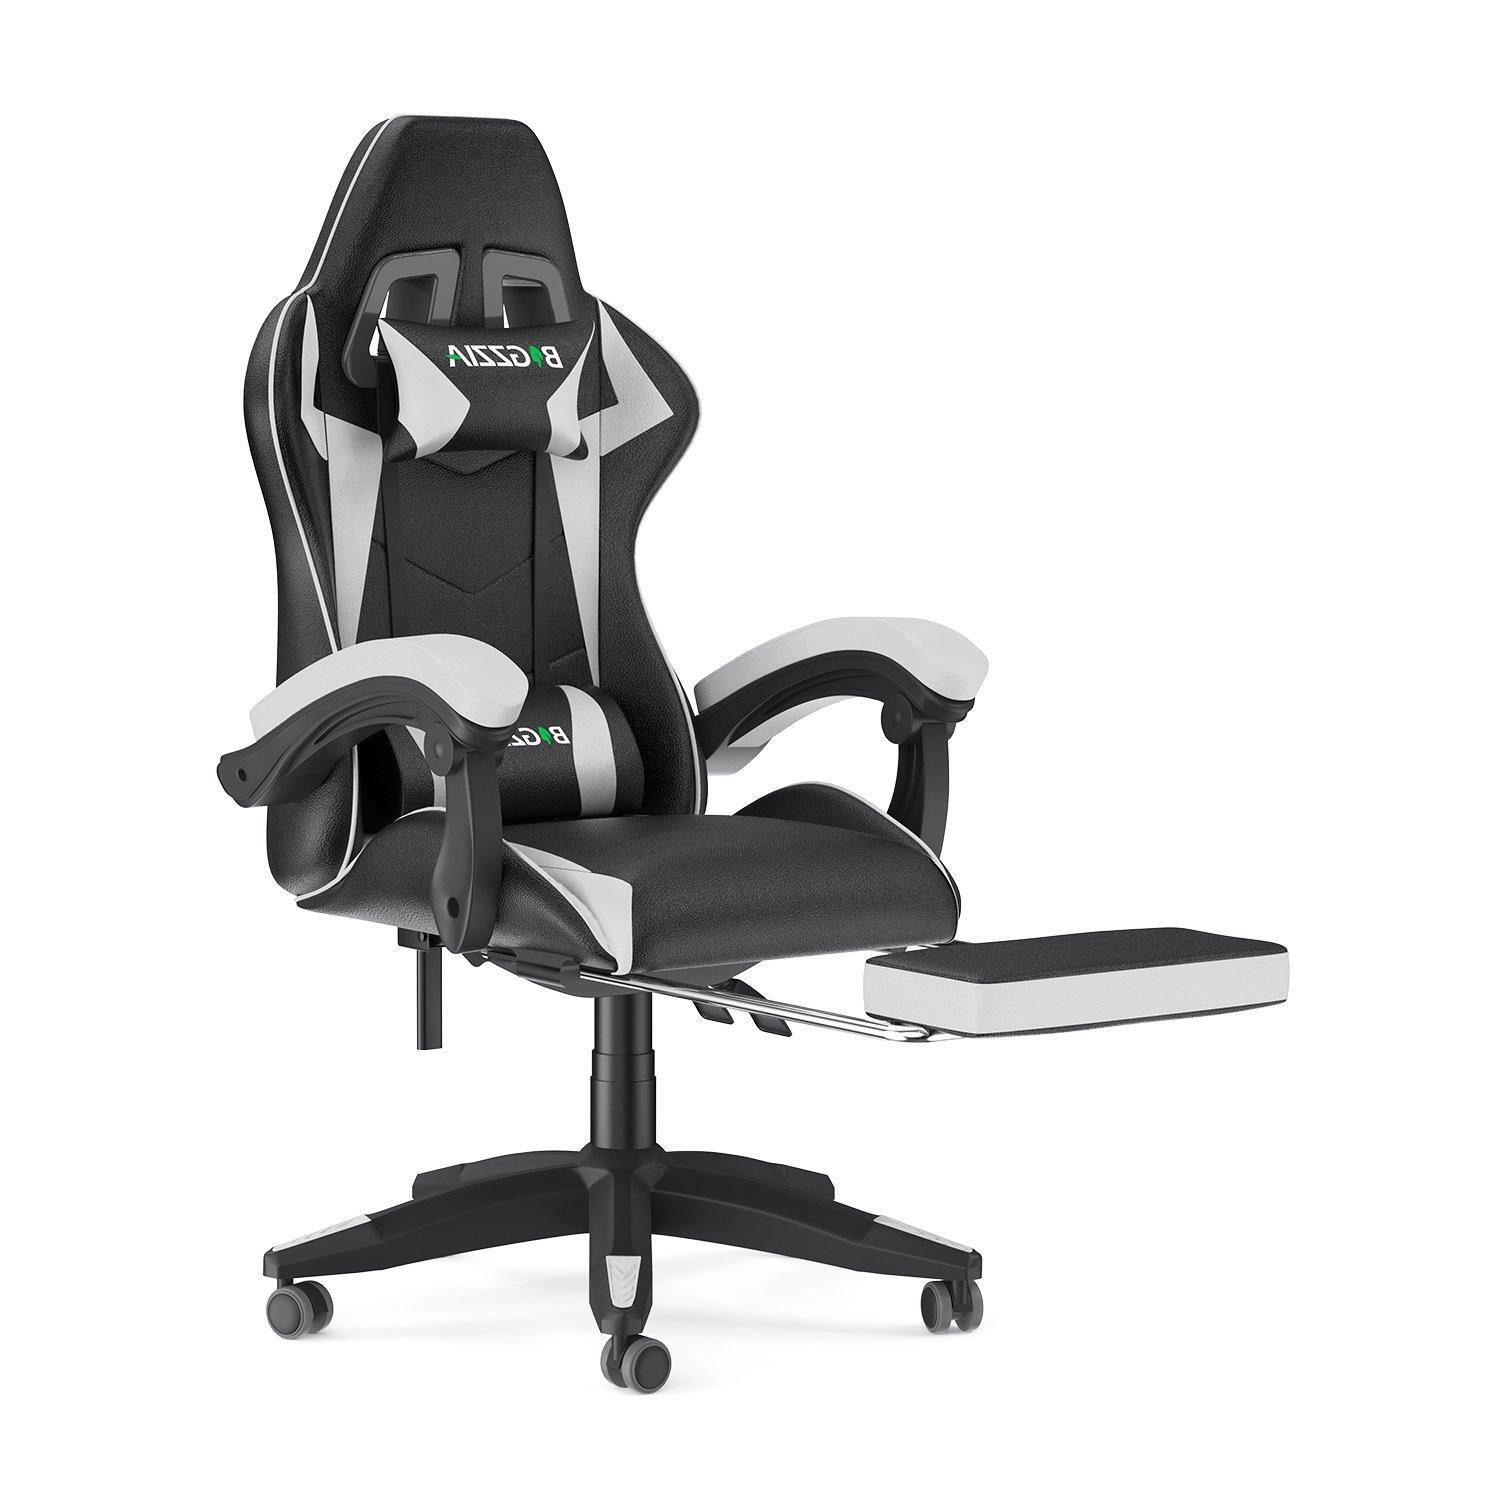 Ergonomic Gaming Chair with Footrest - image 1